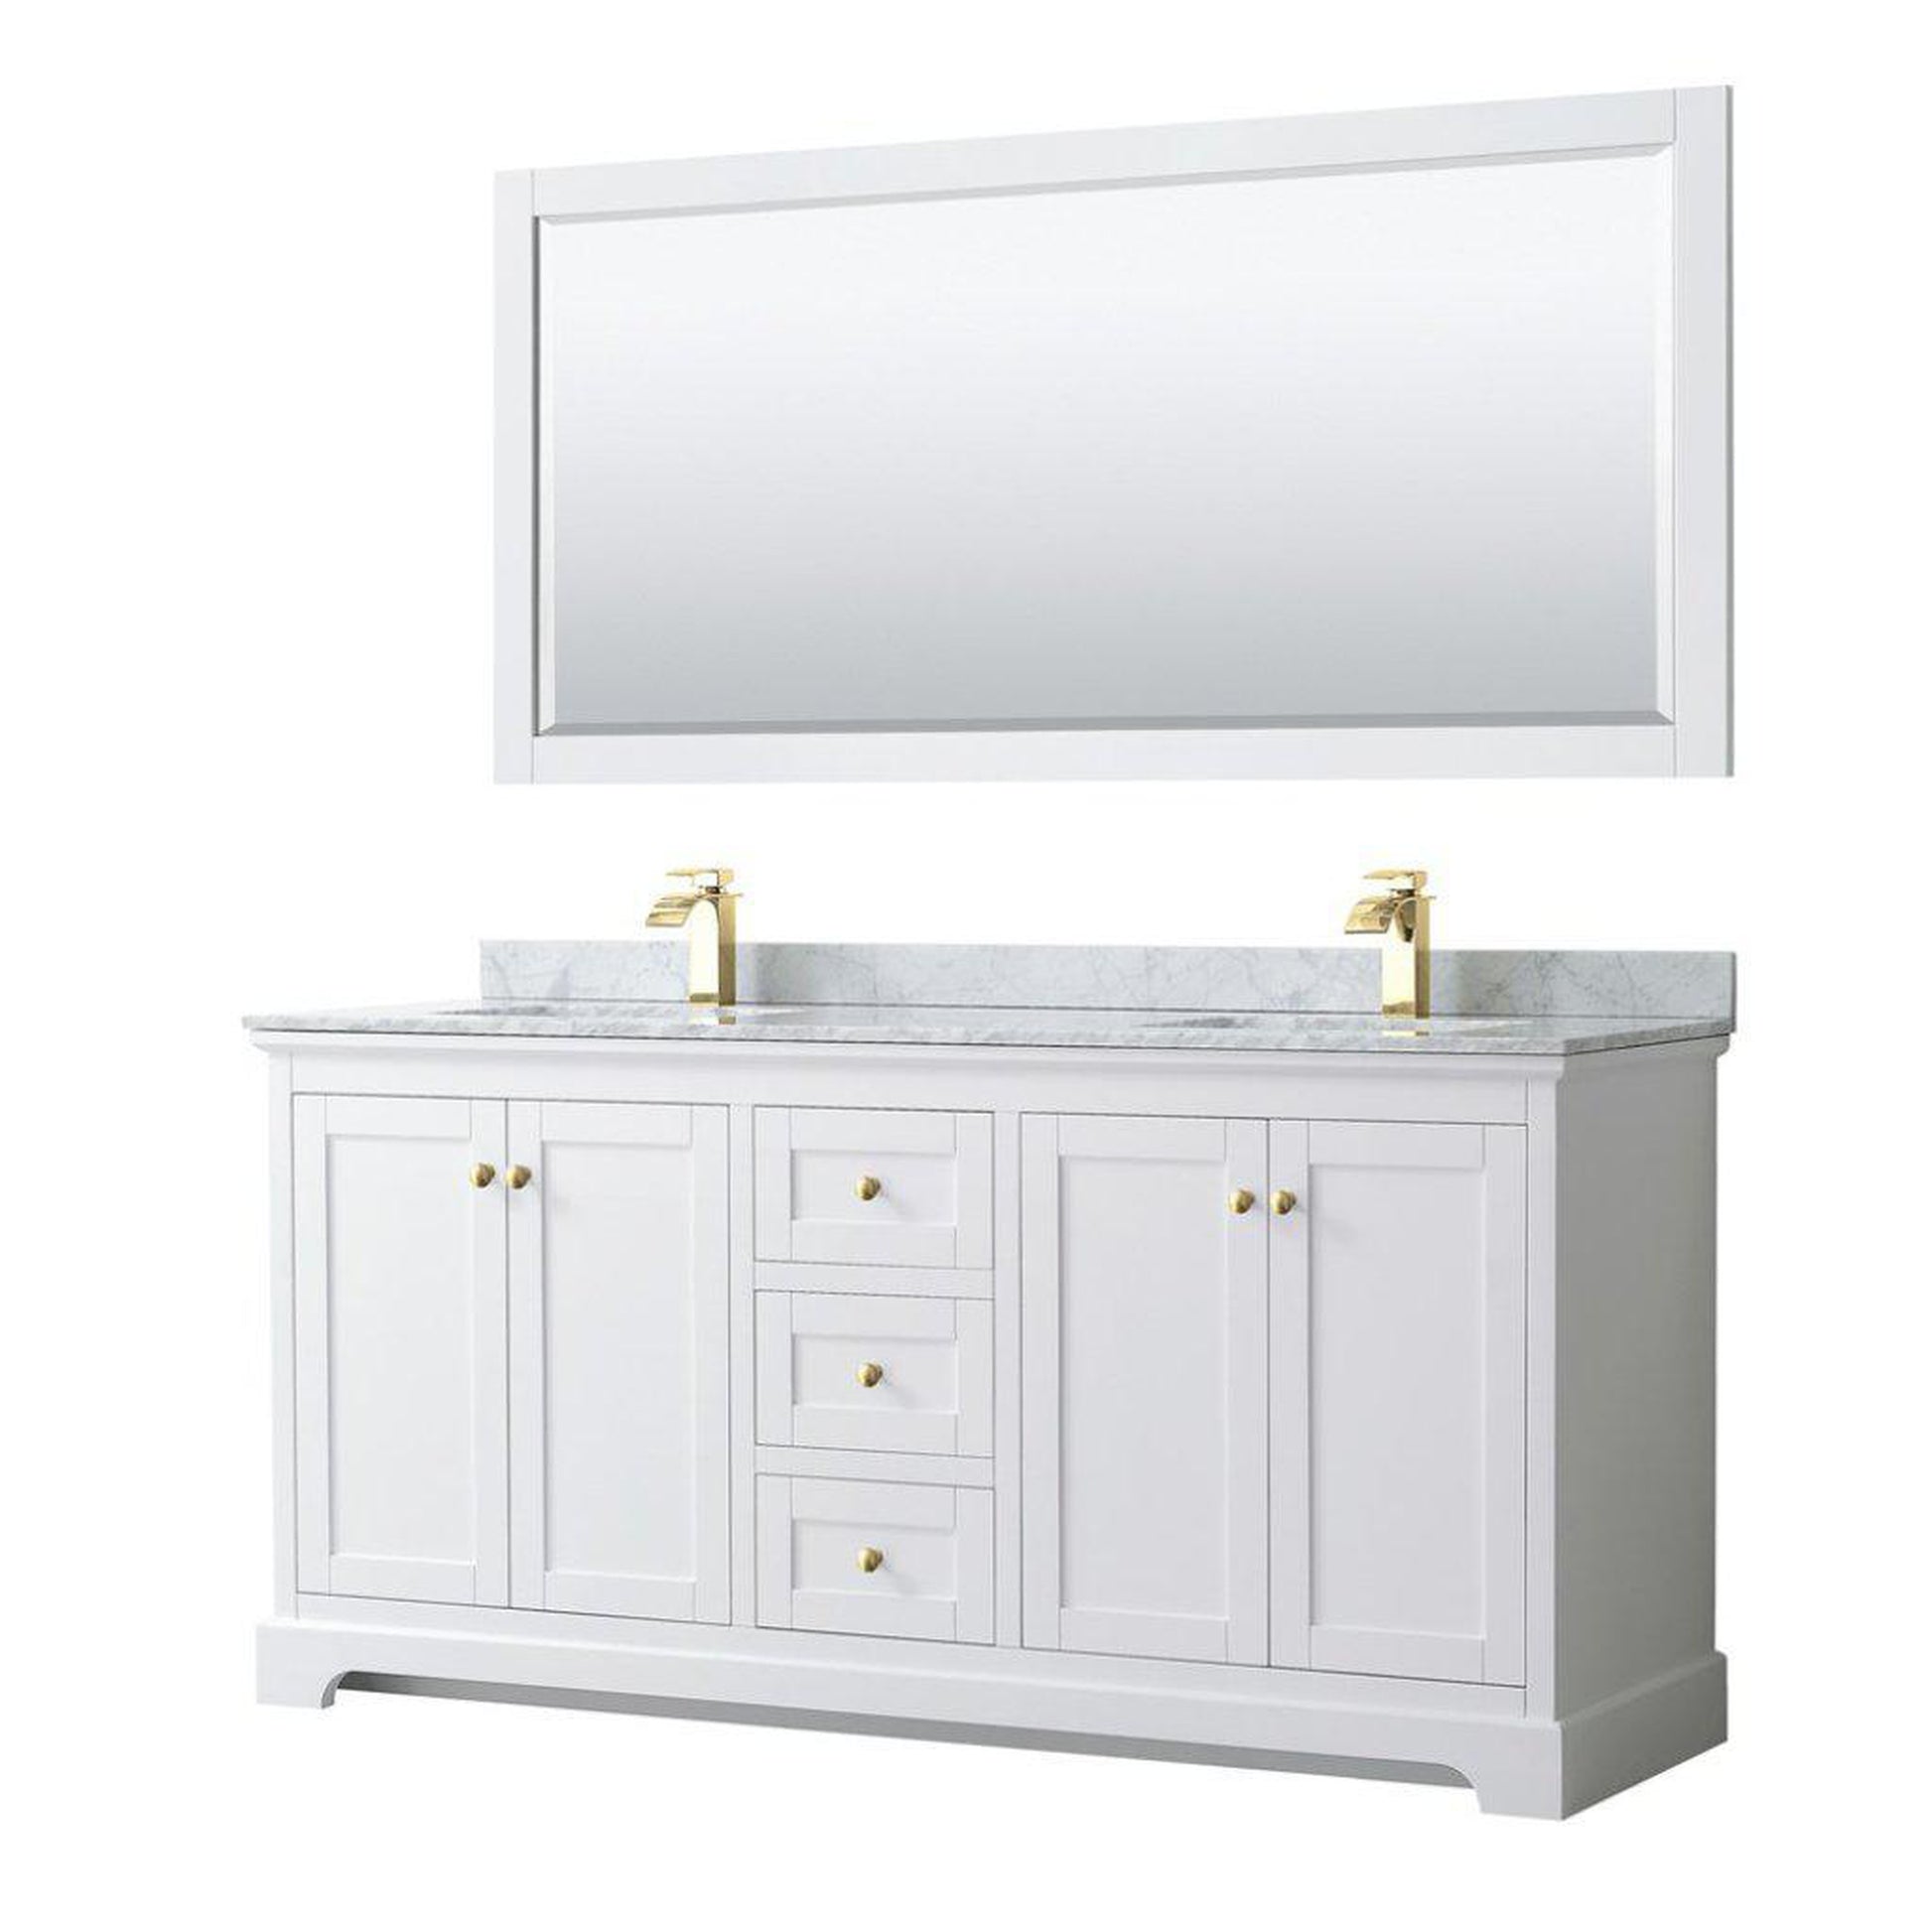 Wyndham Collection Avery 72" White Double Bathroom Vanity Set, White Carrara Marble Countertop With 1-Hole Faucet, Square Sink, 70" Mirror, Gold Trims